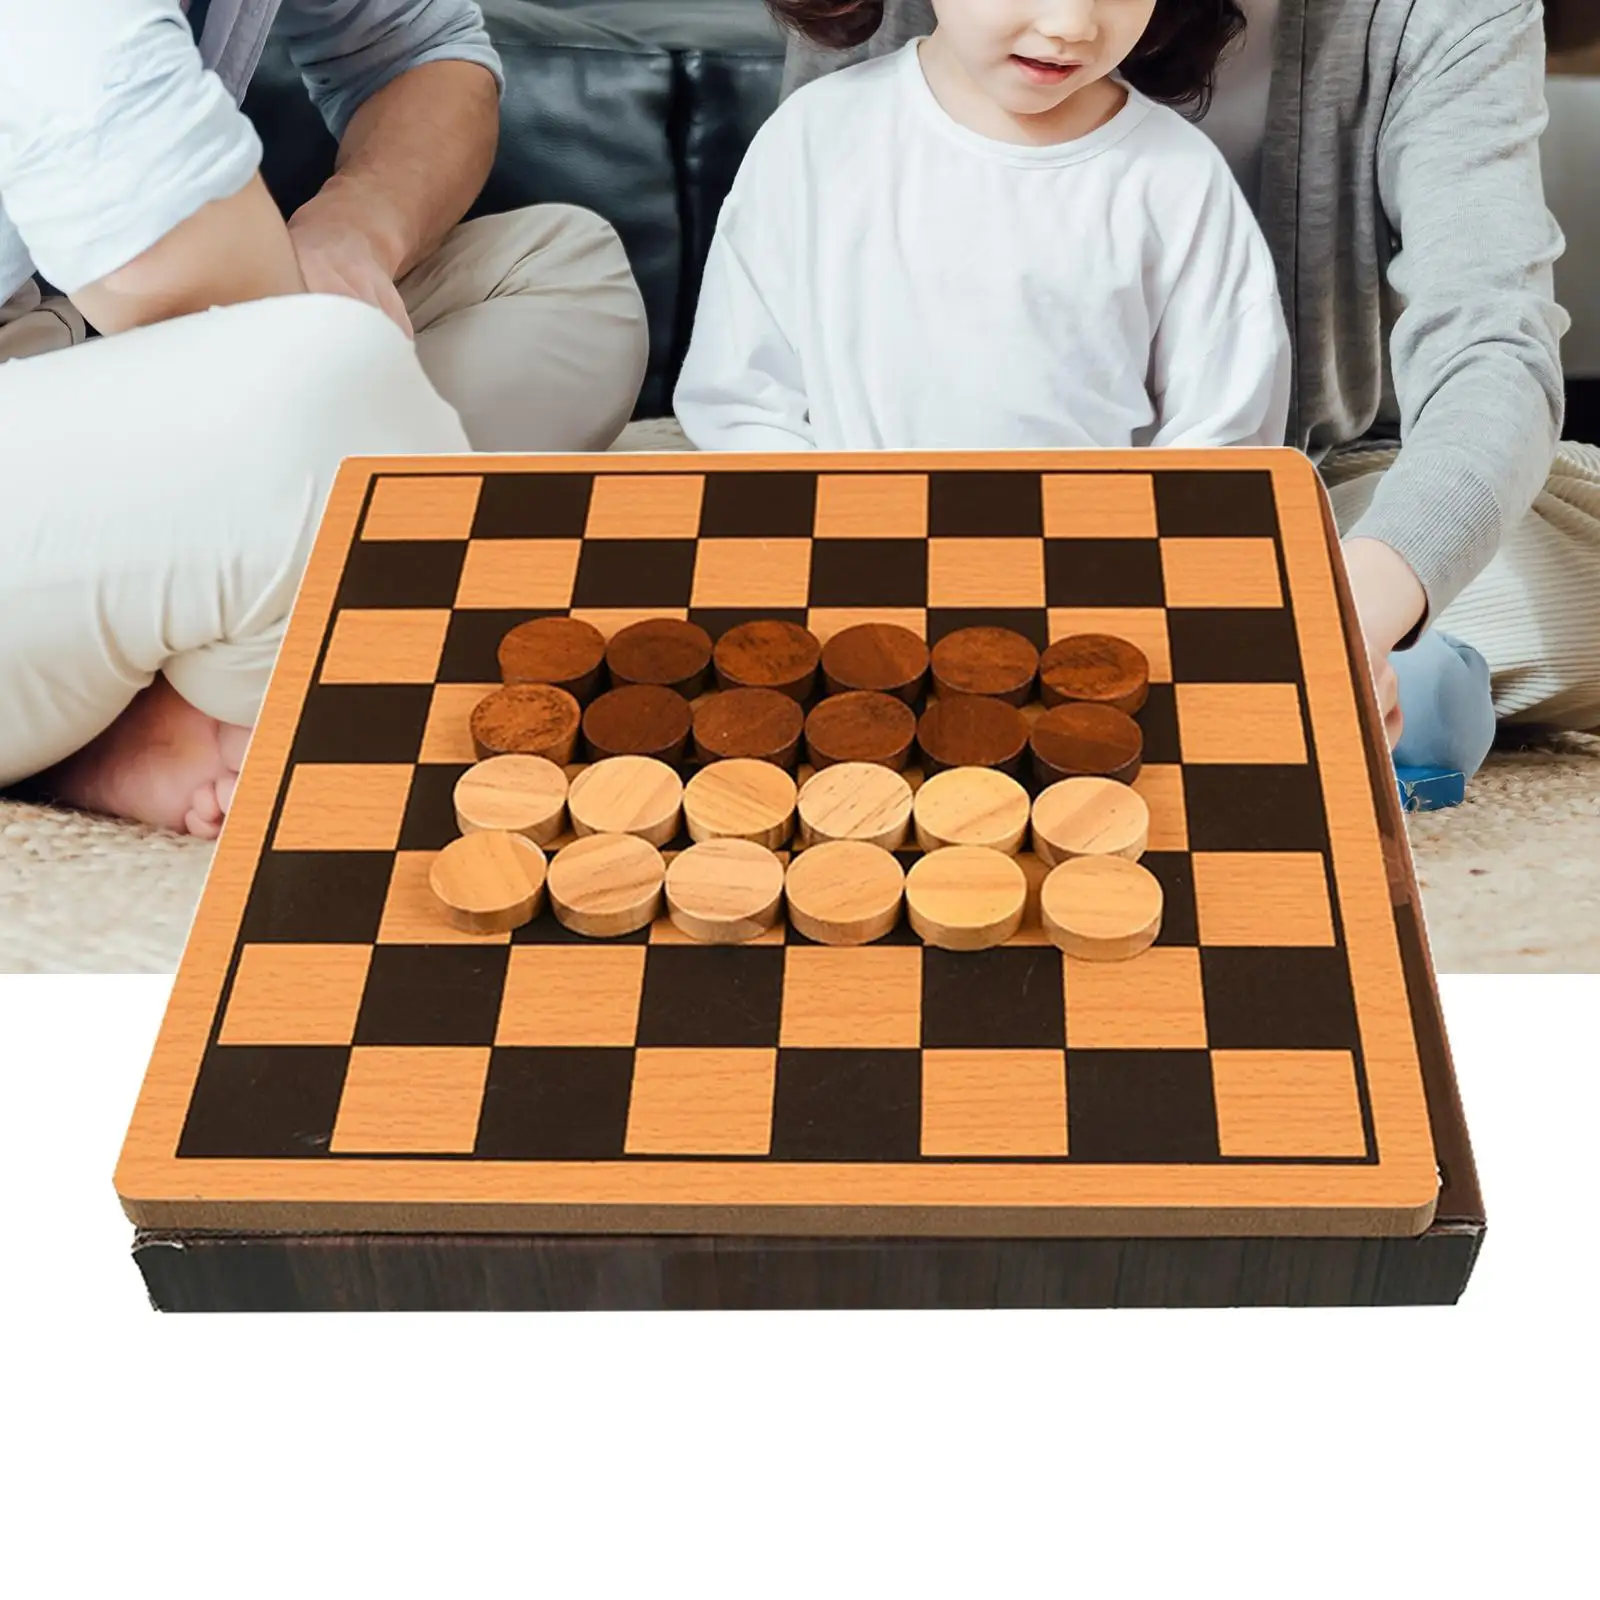 International Chess Game Set Chess Board Playing Toys Early Education Toys Craft for Centerpieces Travel Desktop